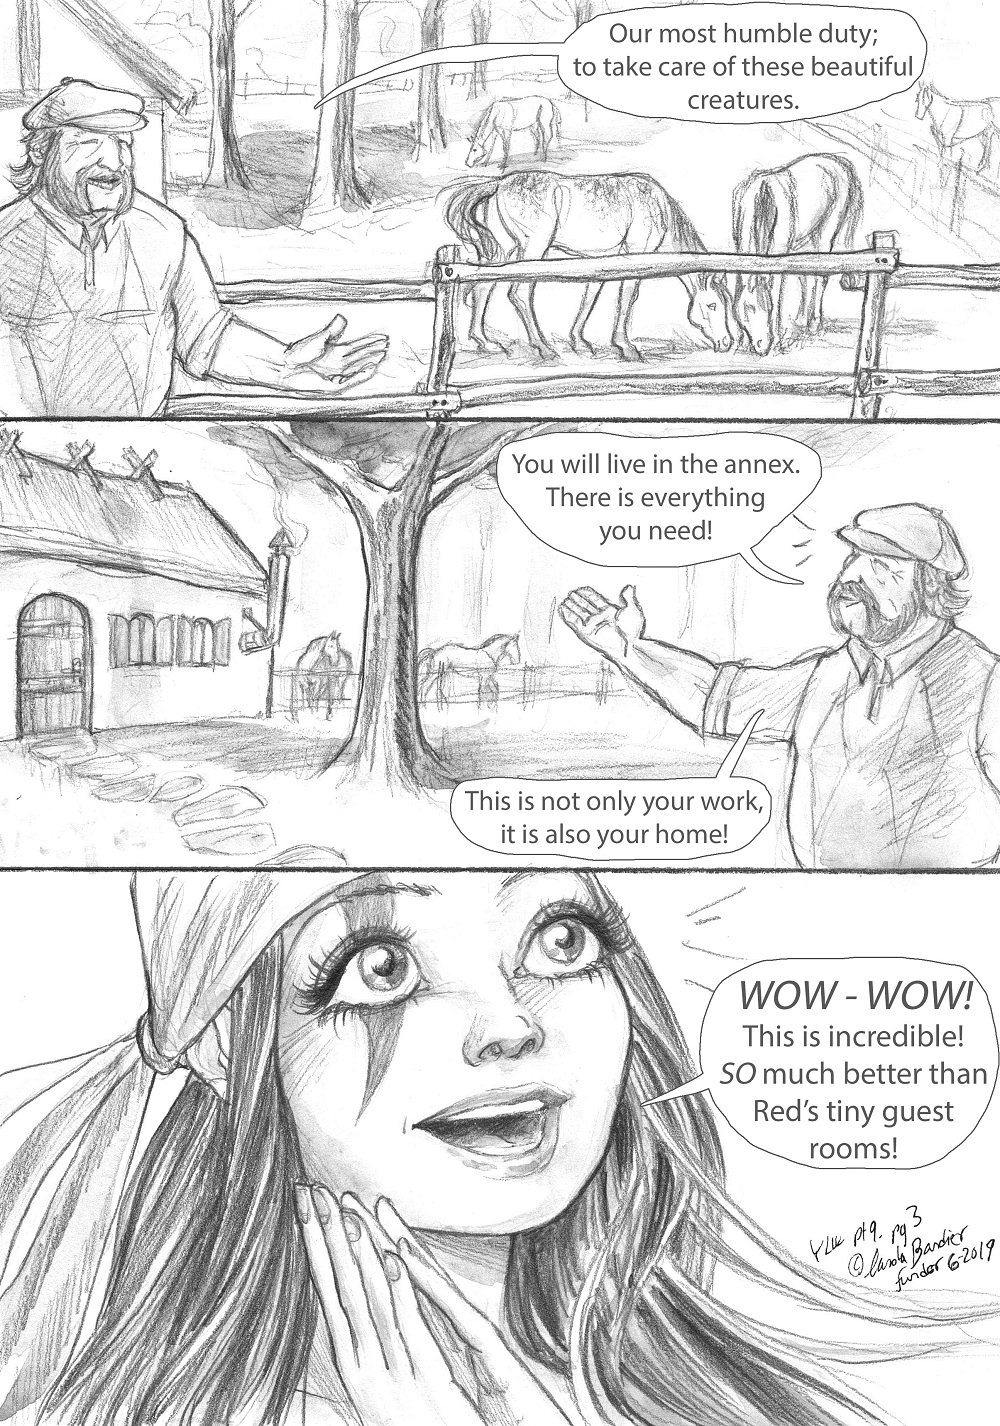 YLW_part9_A_Convenient_Coincidence_page3